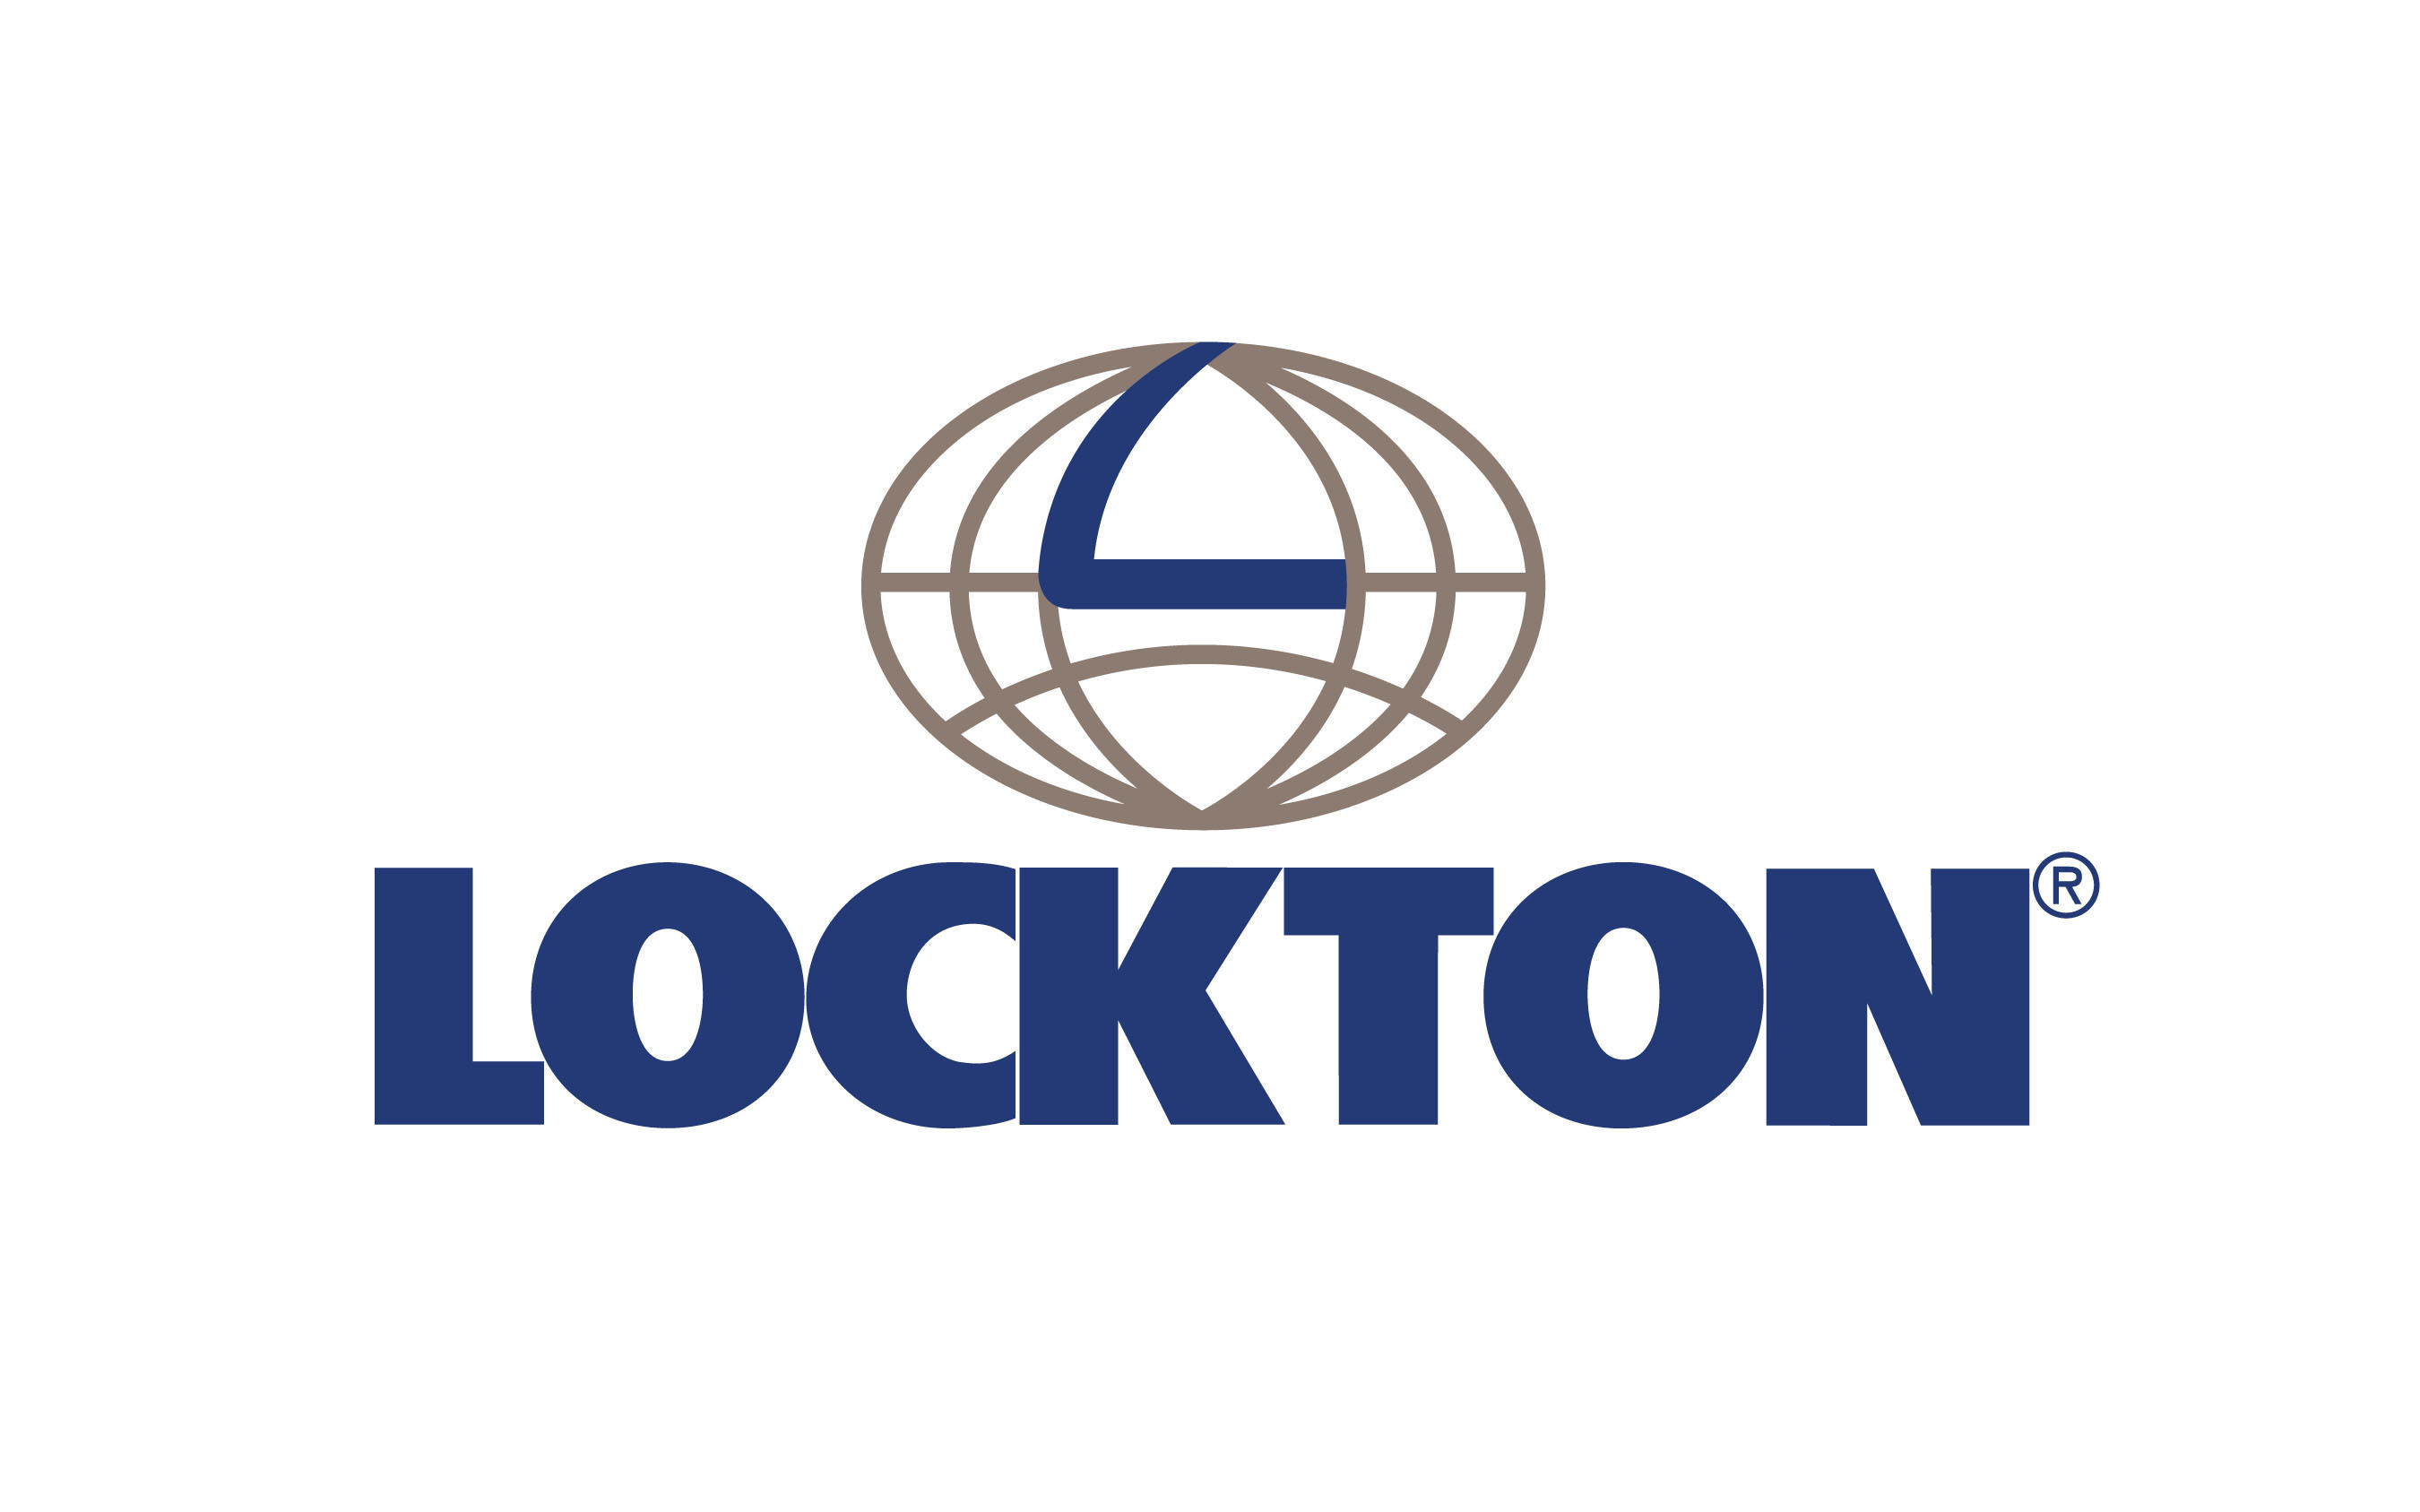 Lockton Re adds Bisset & Foreman from Aon